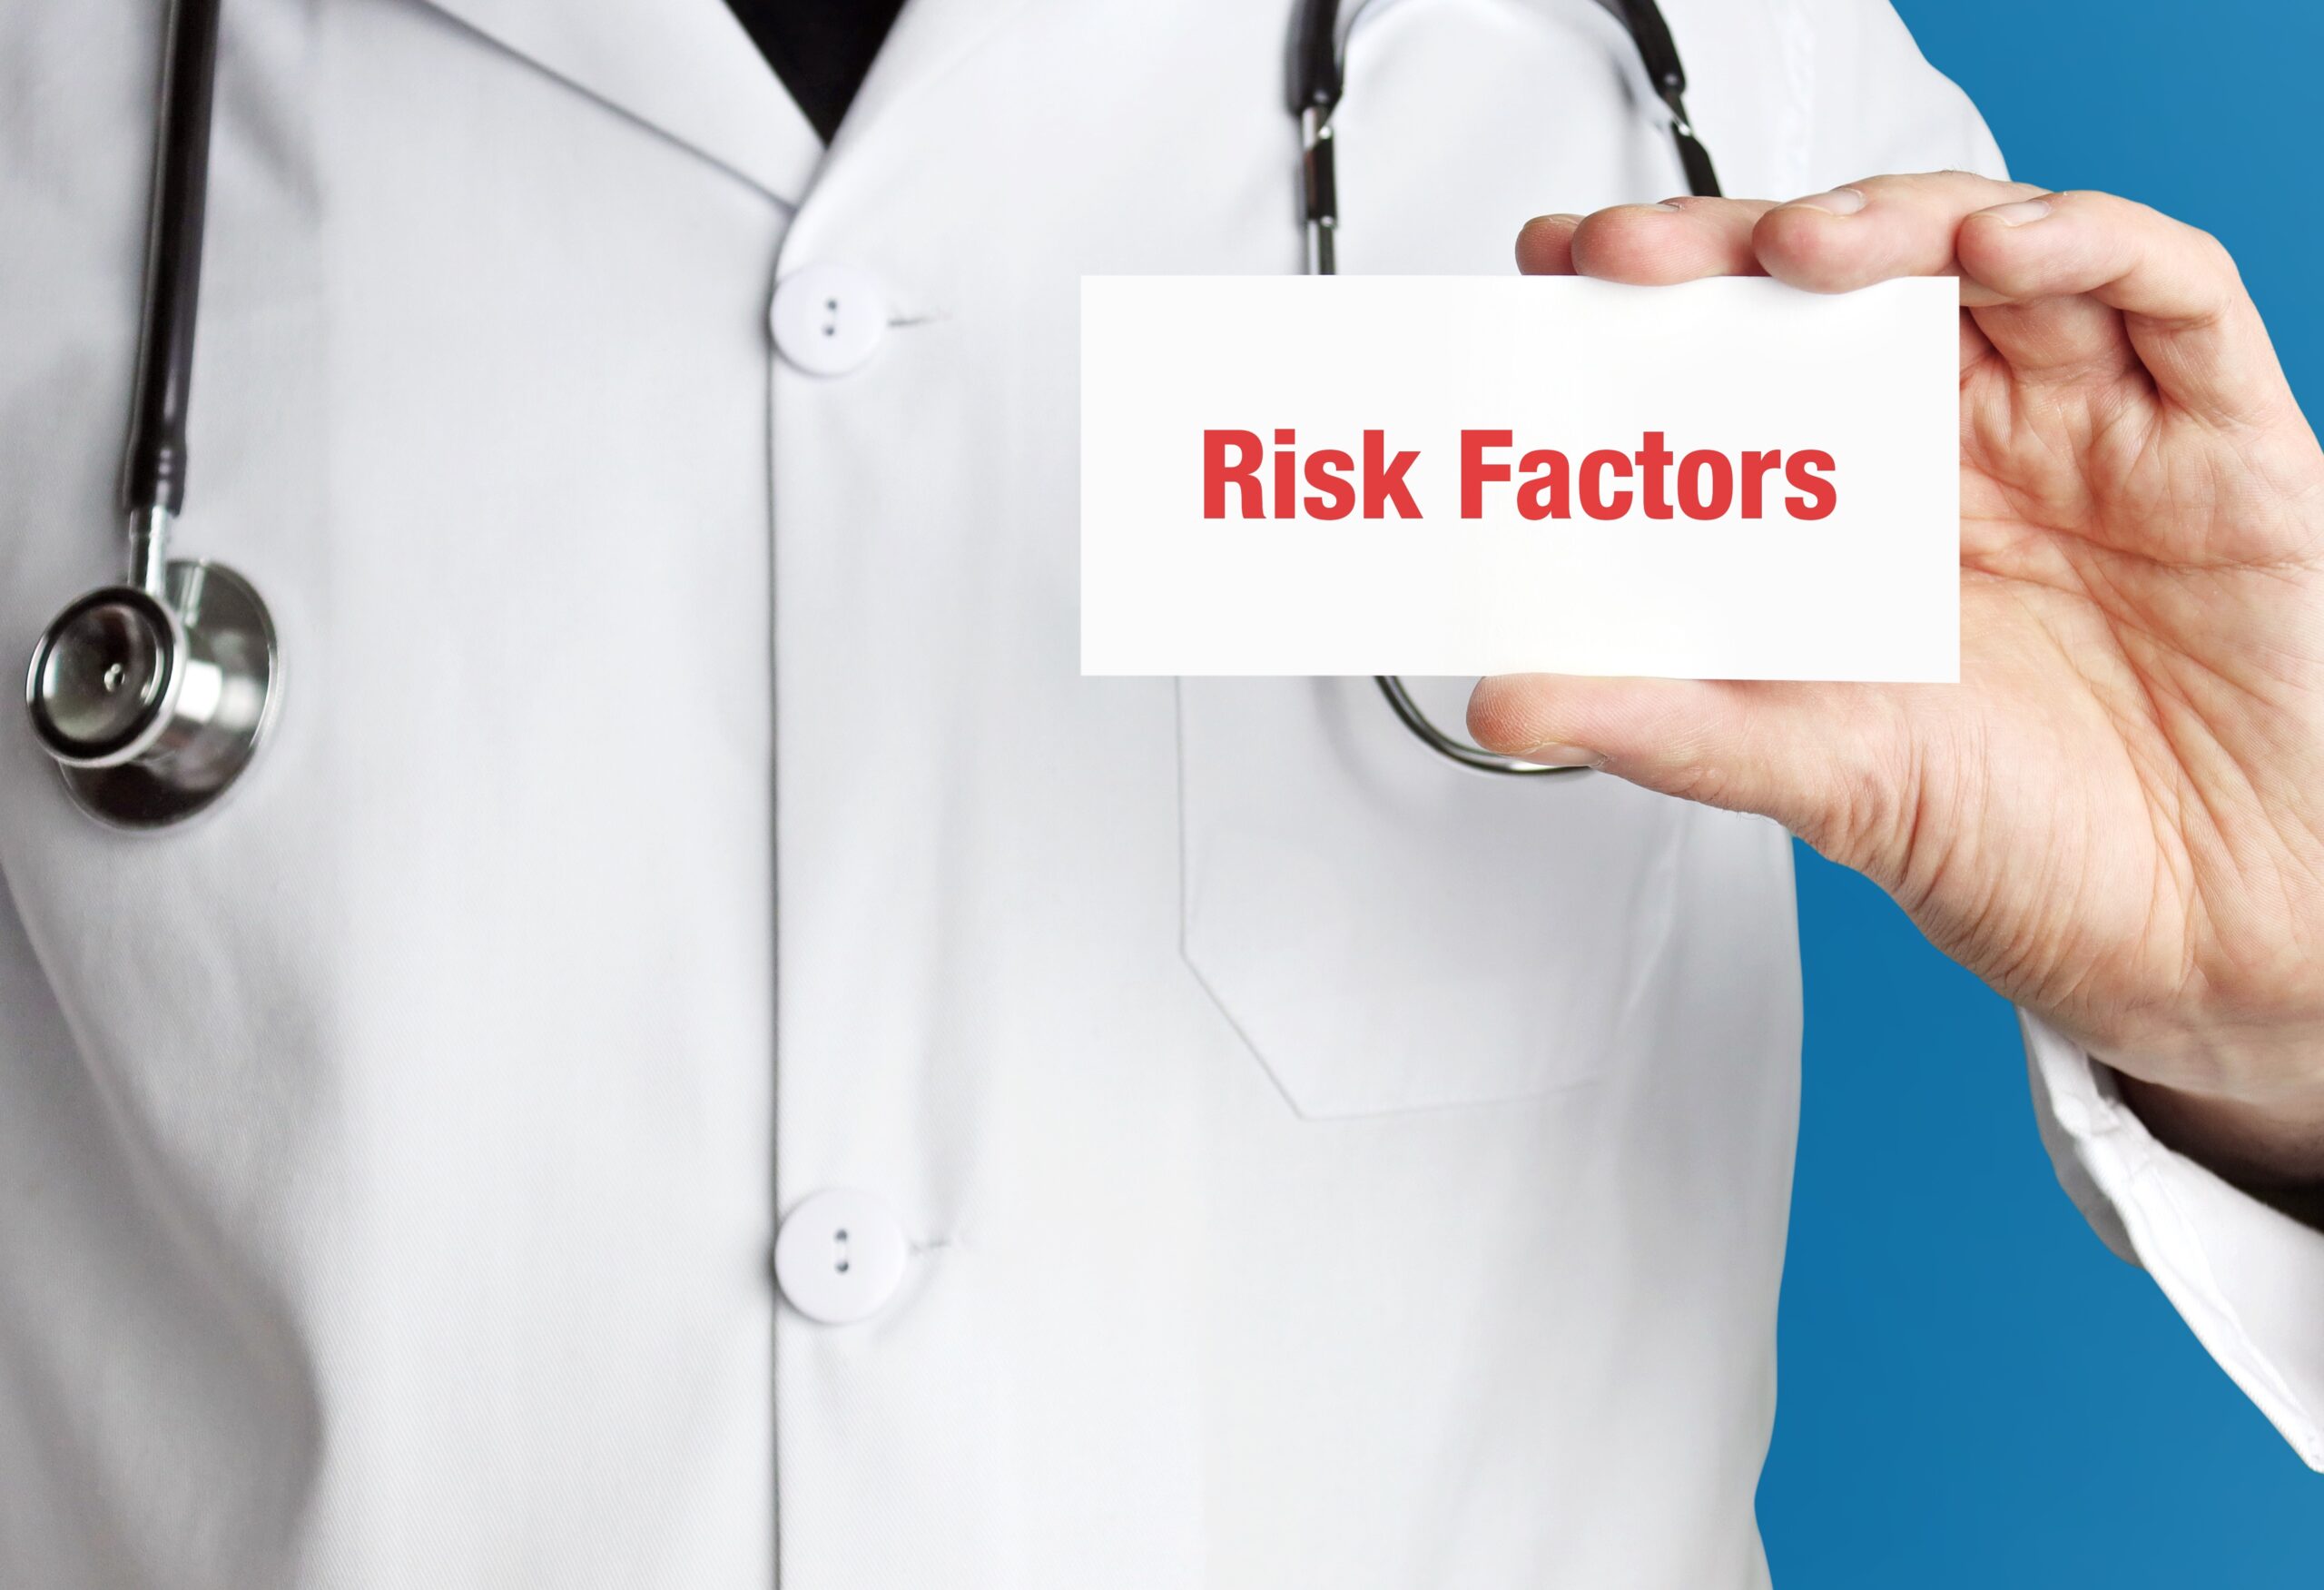 Risk Factors. Doctor in smock holds up business card. The term Risk Factors is in the sign. Symbol of disease, health, medicine